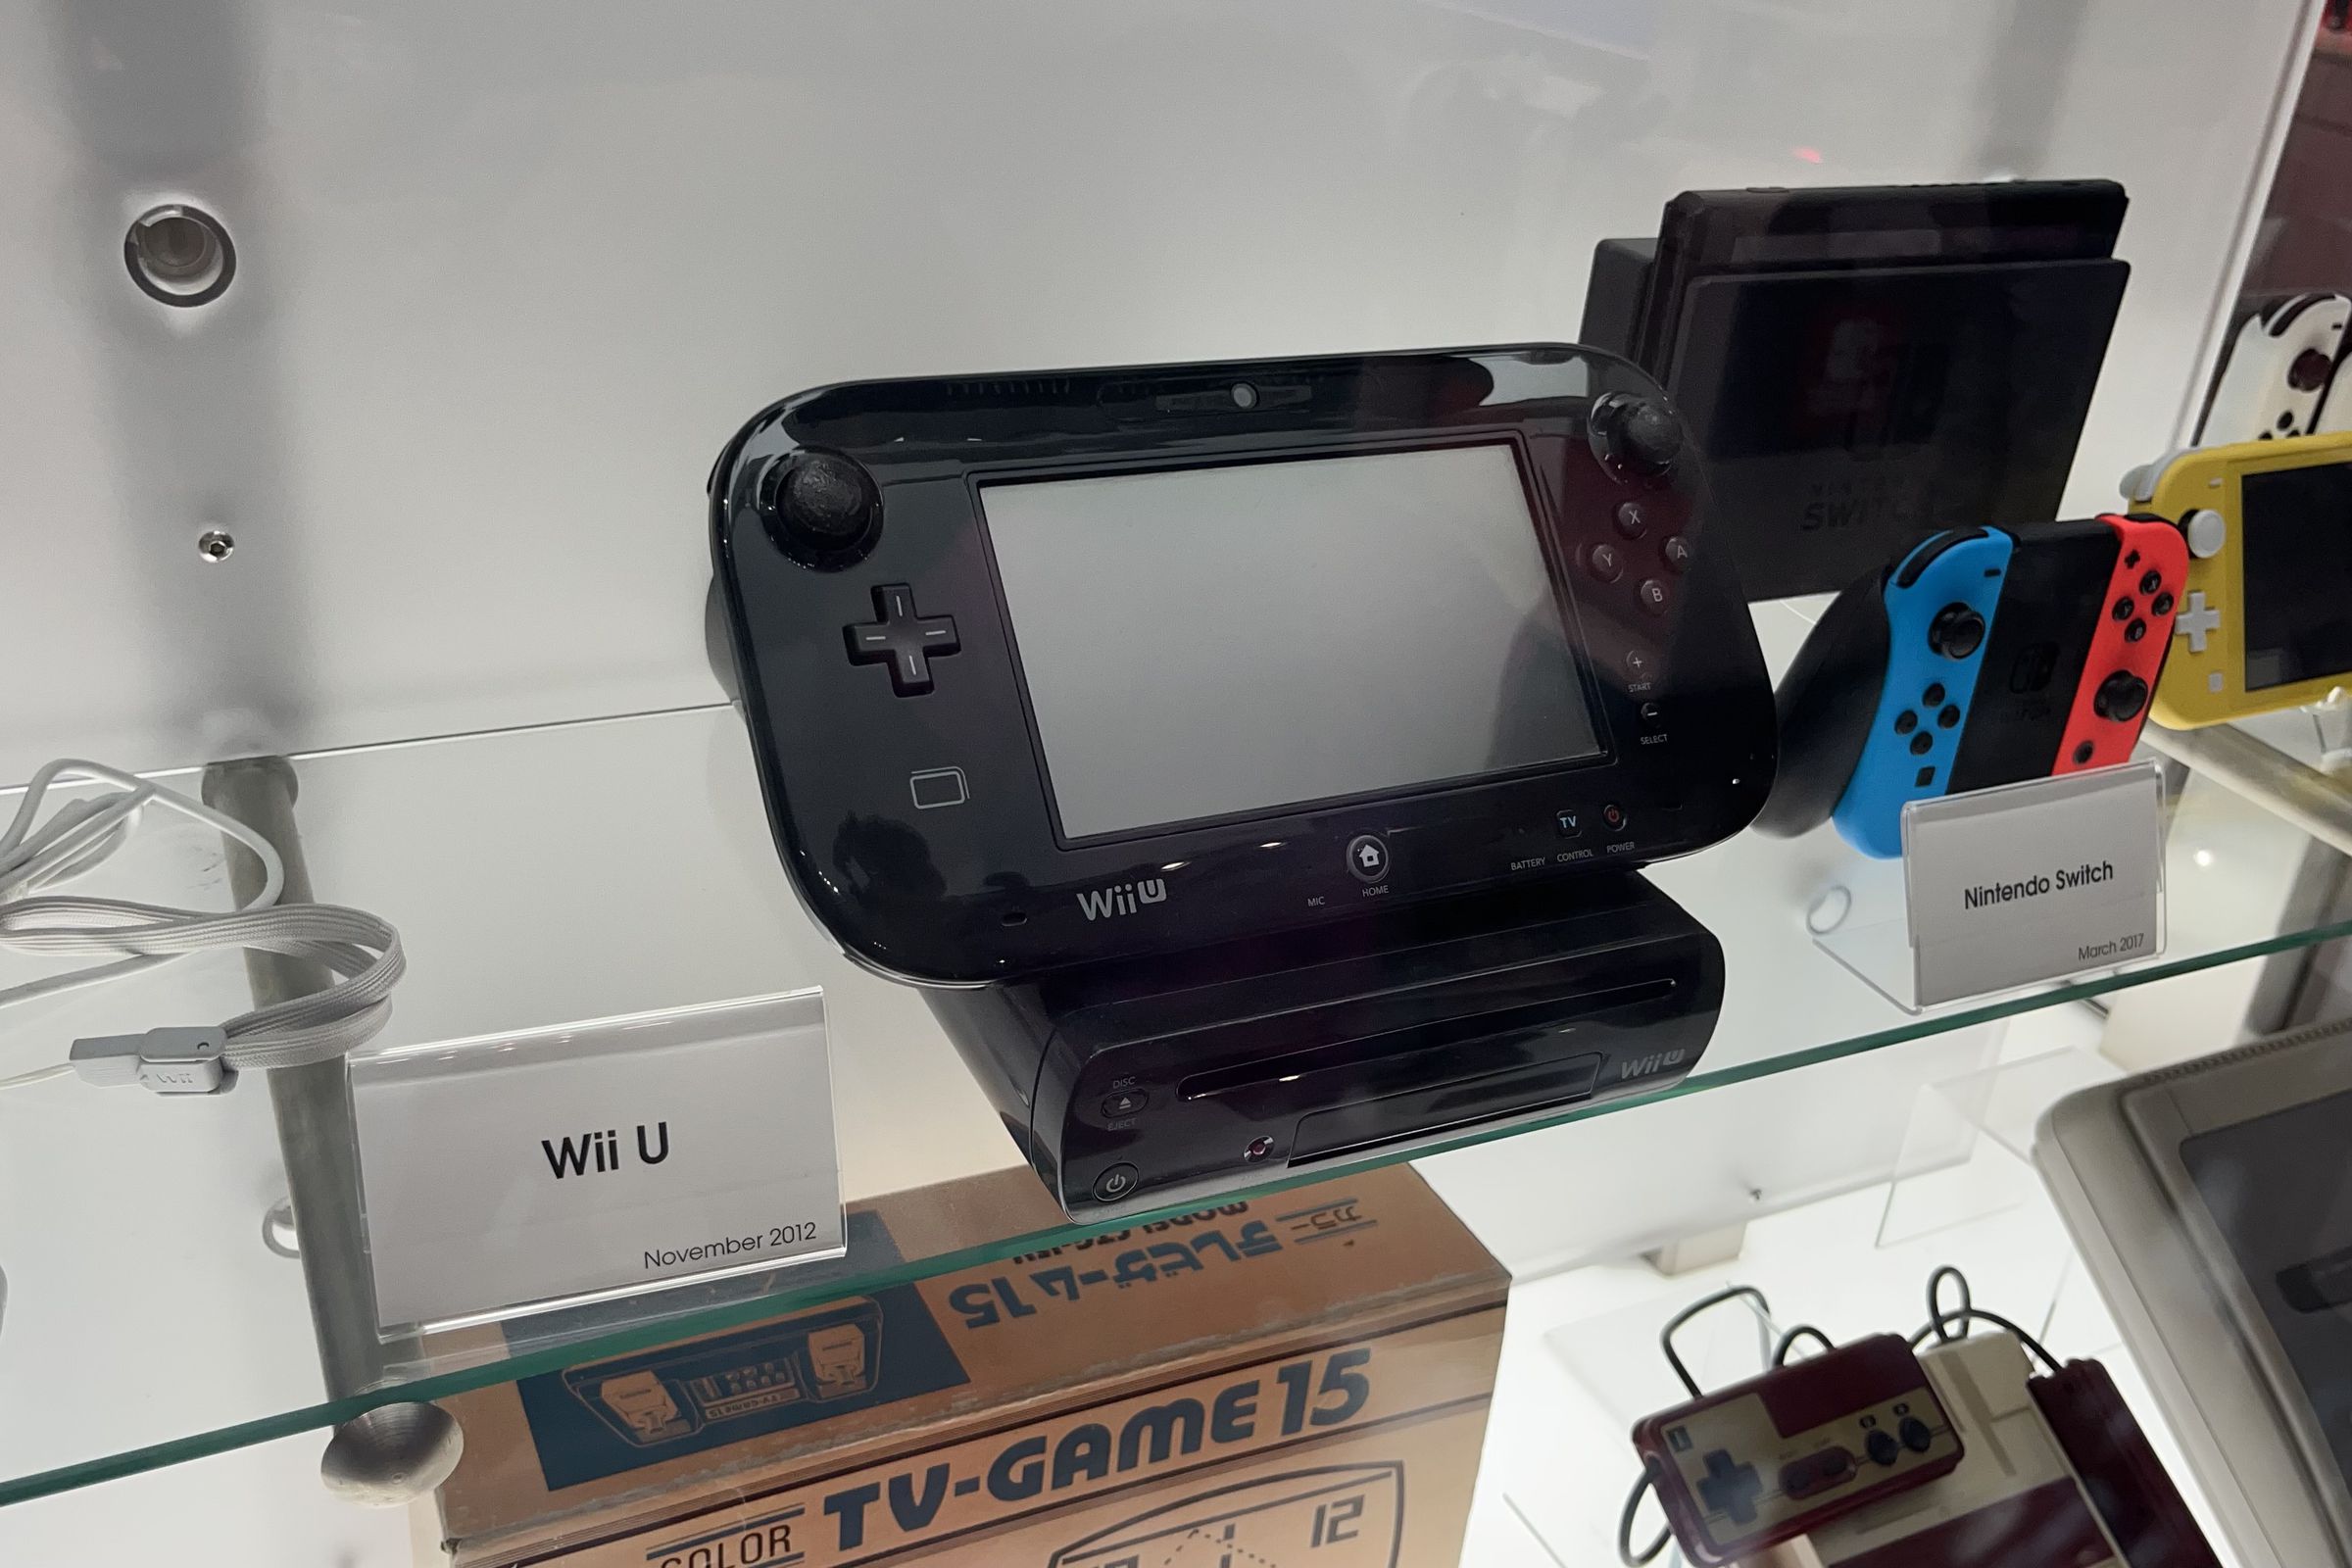 black Wii U system in a glass display case with the Nintendo Switch beside it and the tv-game 15 under it. The Wii U gamepad with screen is sitting on top of the Wii U system. a famicom and super famicom are on the bottom right.